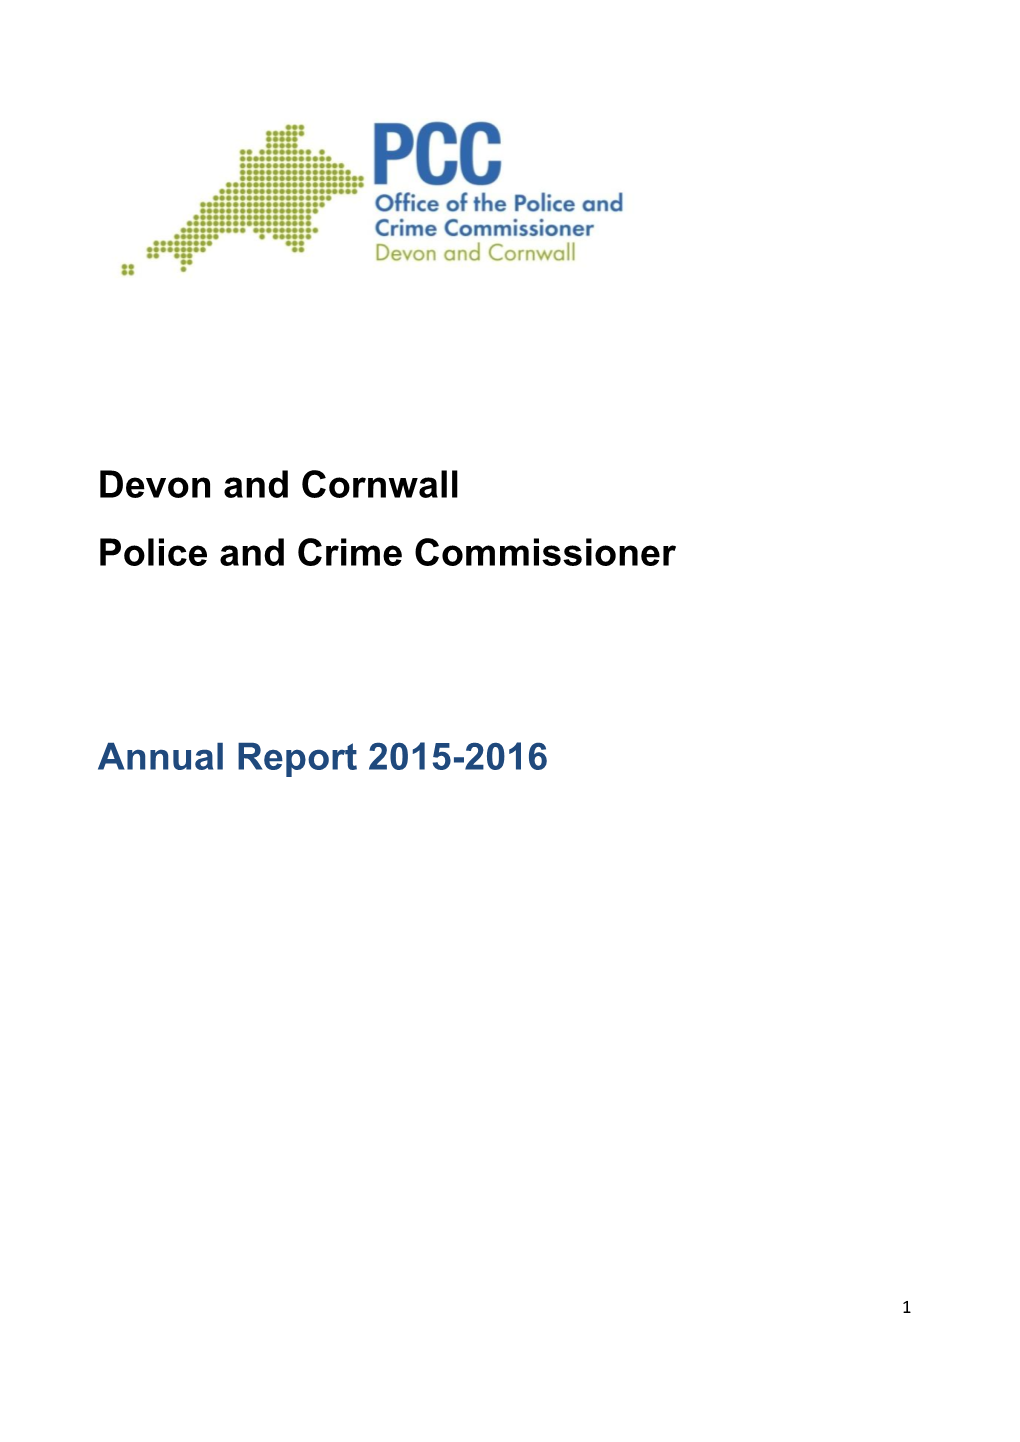 Devon and Cornwall Police and Crime Commissioner